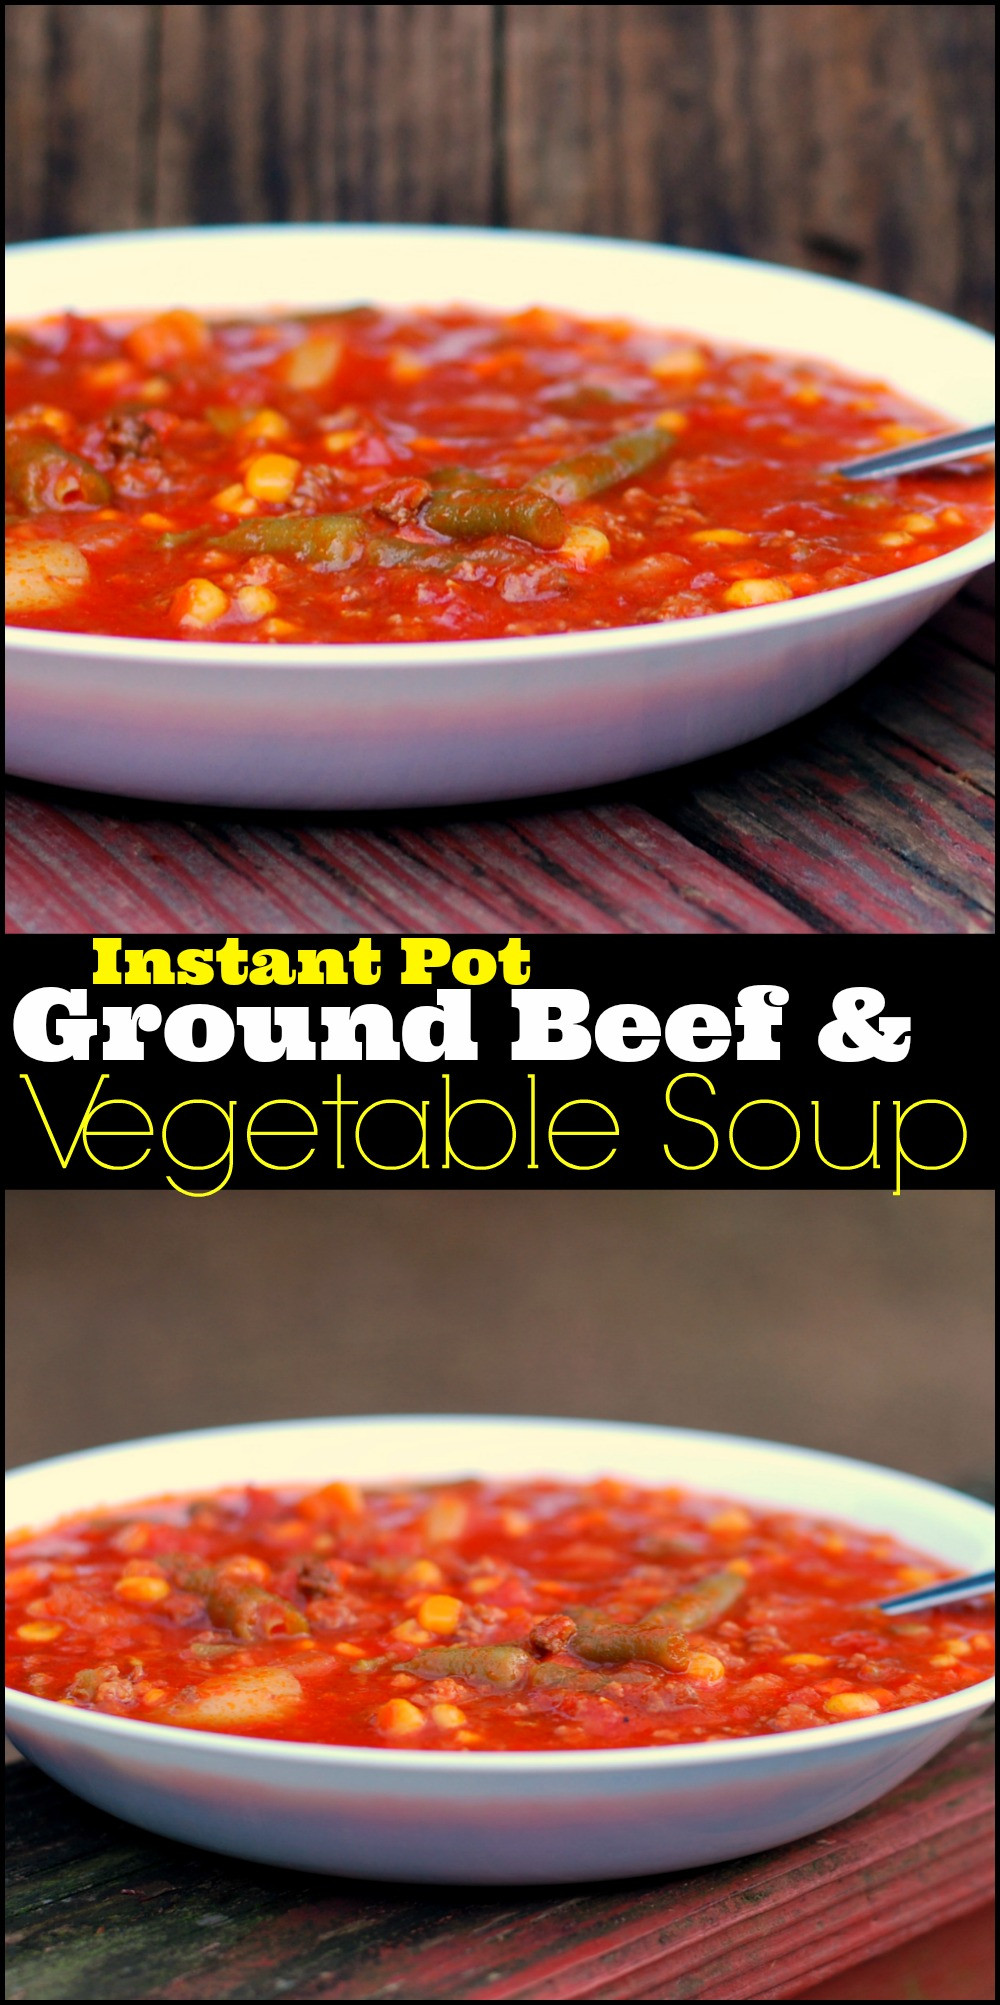 Beef Soup Instant Pot
 Instant Pot Ground Beef & Ve able Soup Aunt Bee s Recipes